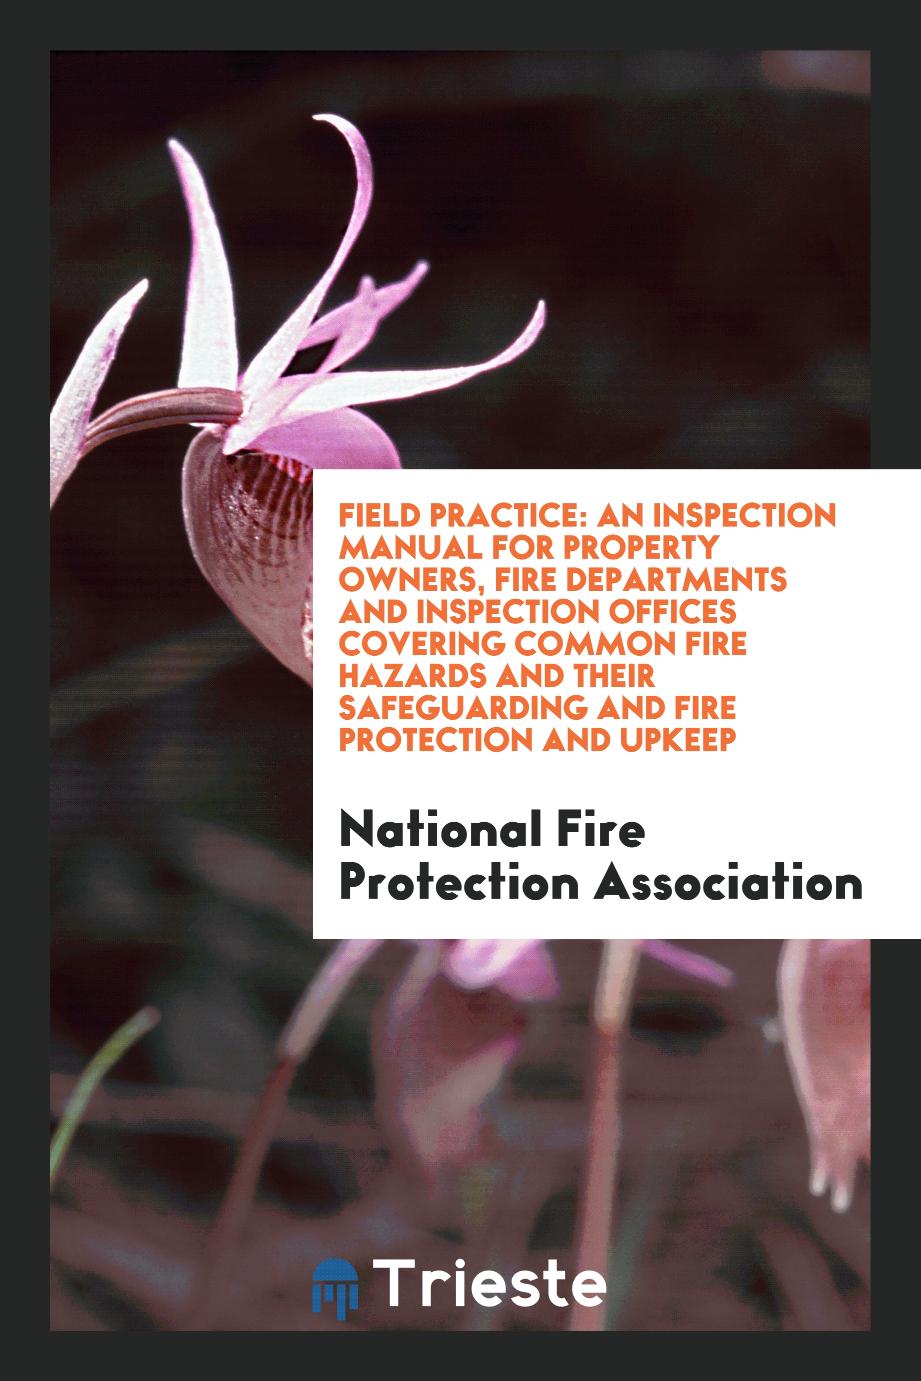 Field Practice: An Inspection Manual for Property Owners, Fire Departments and Inspection Offices Covering Common Fire Hazards and Their Safeguarding and Fire Protection and Upkeep